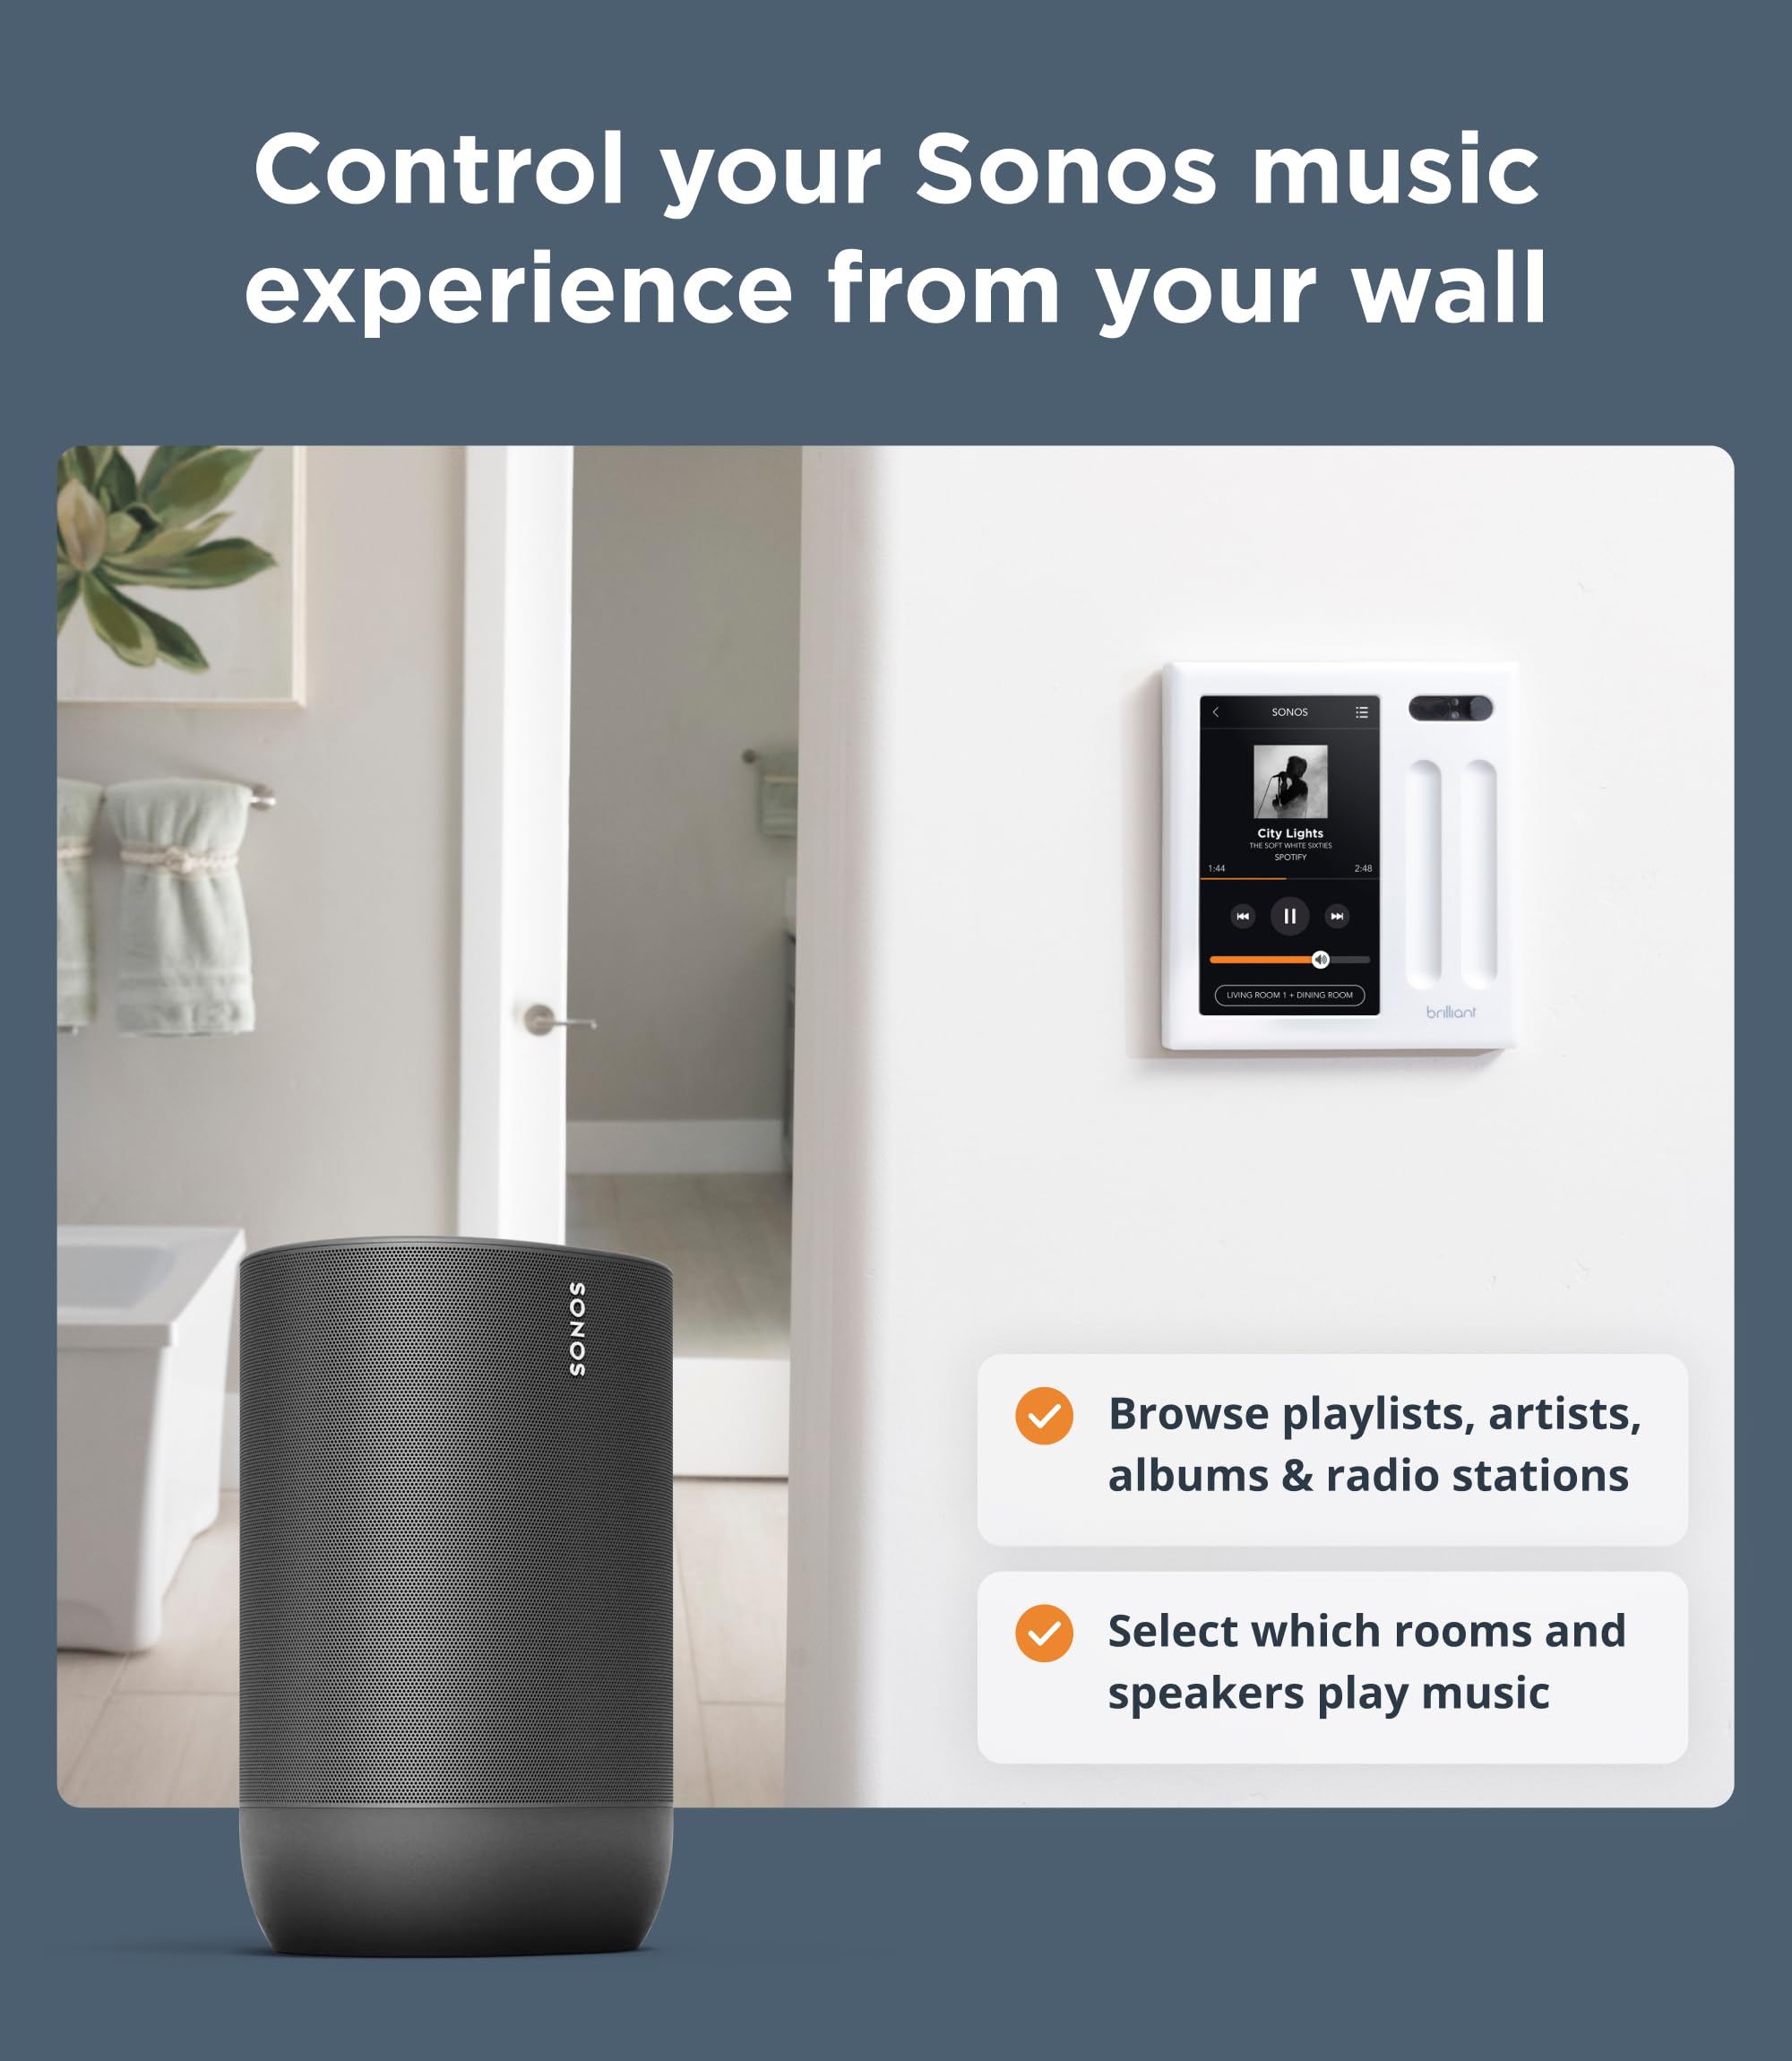 Brilliant Smart Home Control (3-Switch Panel) — Alexa Built-In & Compatible with Ring, Sonos, Hue, Google Nest, Wemo, SmartThings, Apple HomeKit — In-Wall Touchscreen Control for Lights, Music, & More